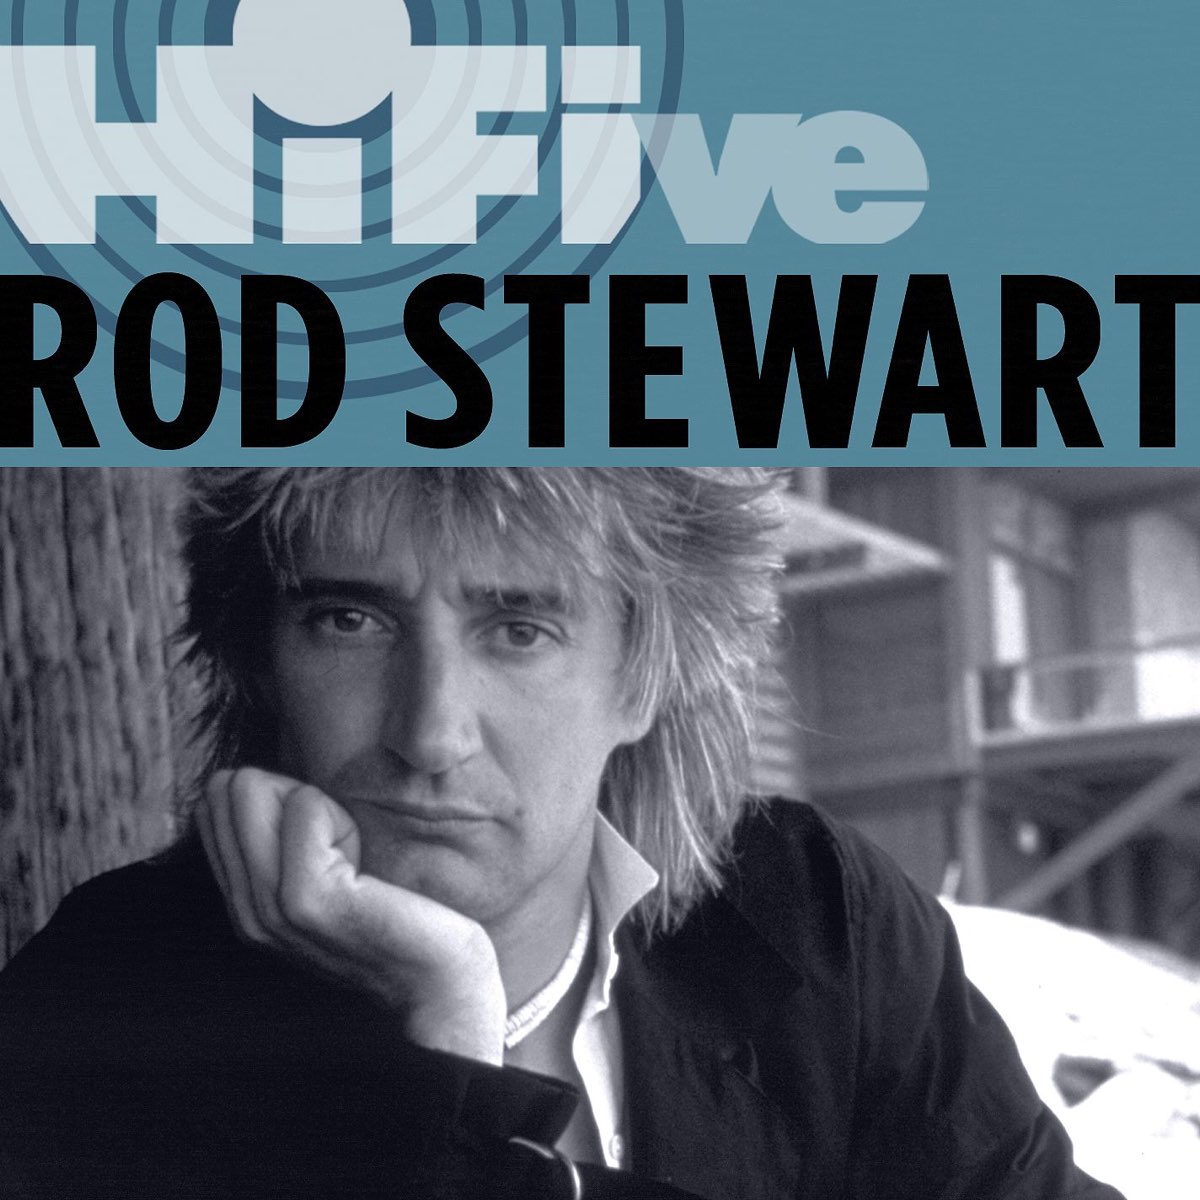 Rod Stewart. Rod Stewart the best of. Some guys have all the luck род Стюарт. Род Стюарт альбомы. Род стюарт слушать лучшие